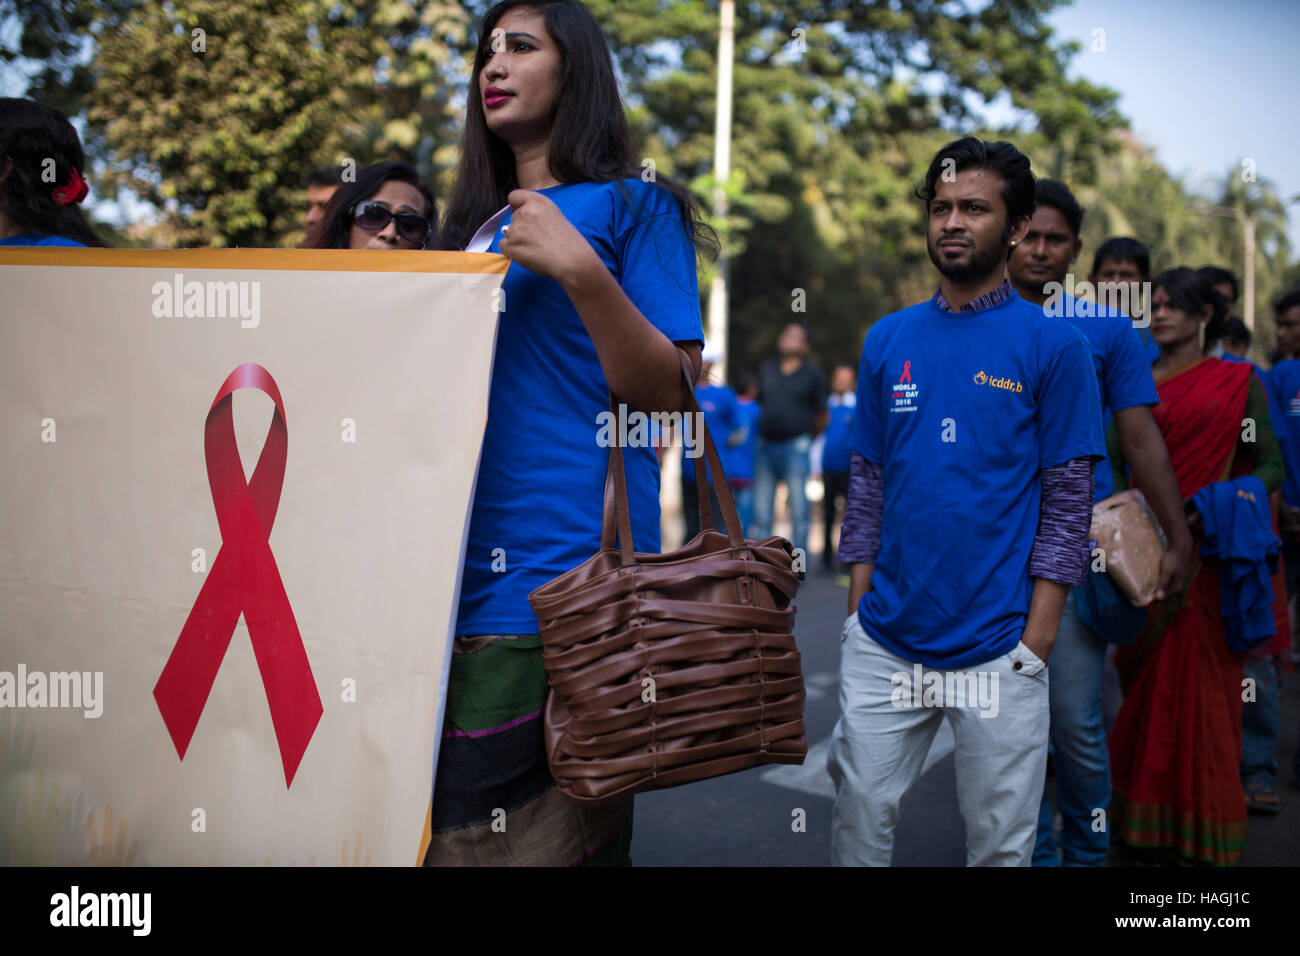 DHAKA, BANGLADESH - DECEMBER 01 :  Bangladeshi activist,sex worker, few wariness organization and transexuals attend a rally on the occasion of the World Aids Day in Dhaka, Bangladesh on December 01, 2016.  According to latest government figures, a total of 3,241 HIV-positive patients have been identified in Bangladesh since 1989, among who 1,299 became AIDS patients and 472 died while the UN estimates the number to be between even higher, between 8,000 and 16,000. Stock Photo